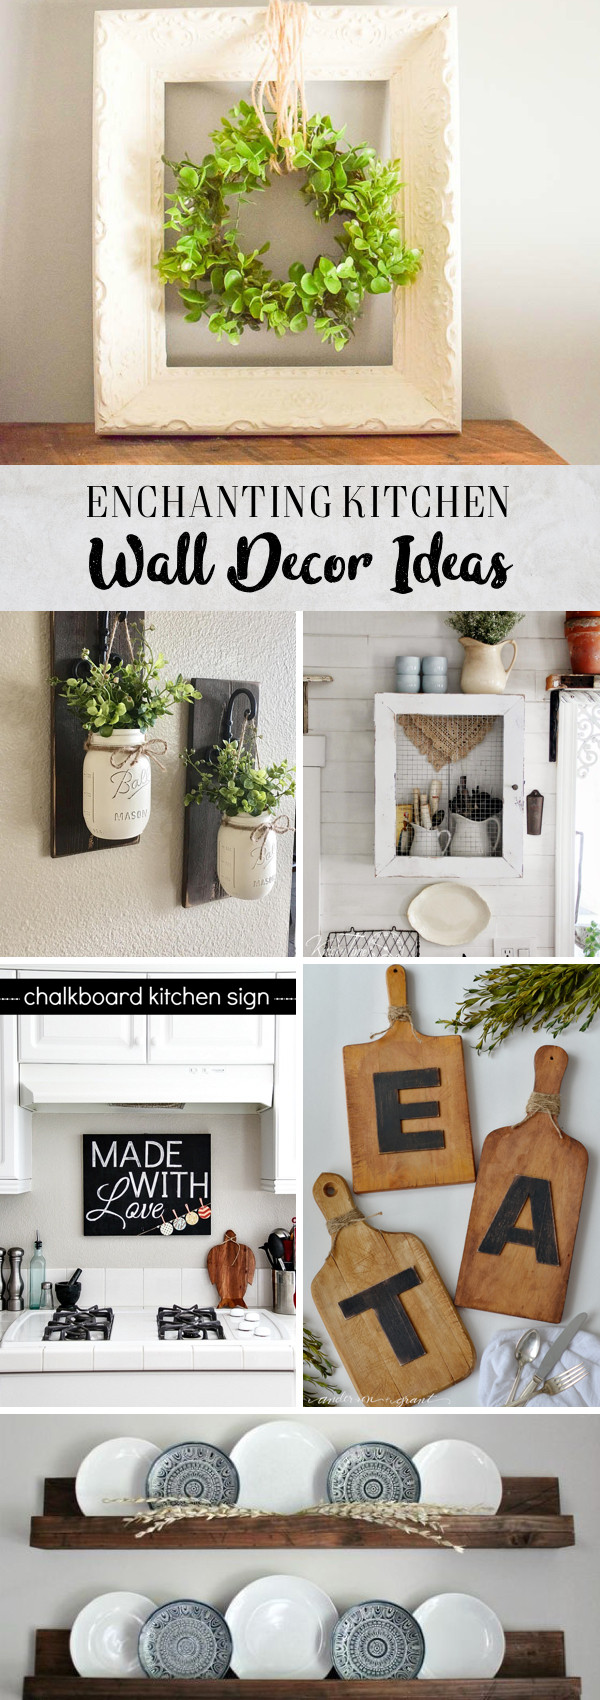 Kitchen Wall Decorating Ideas
 30 Enchanting Kitchen Wall Decor Ideas That are Oozing